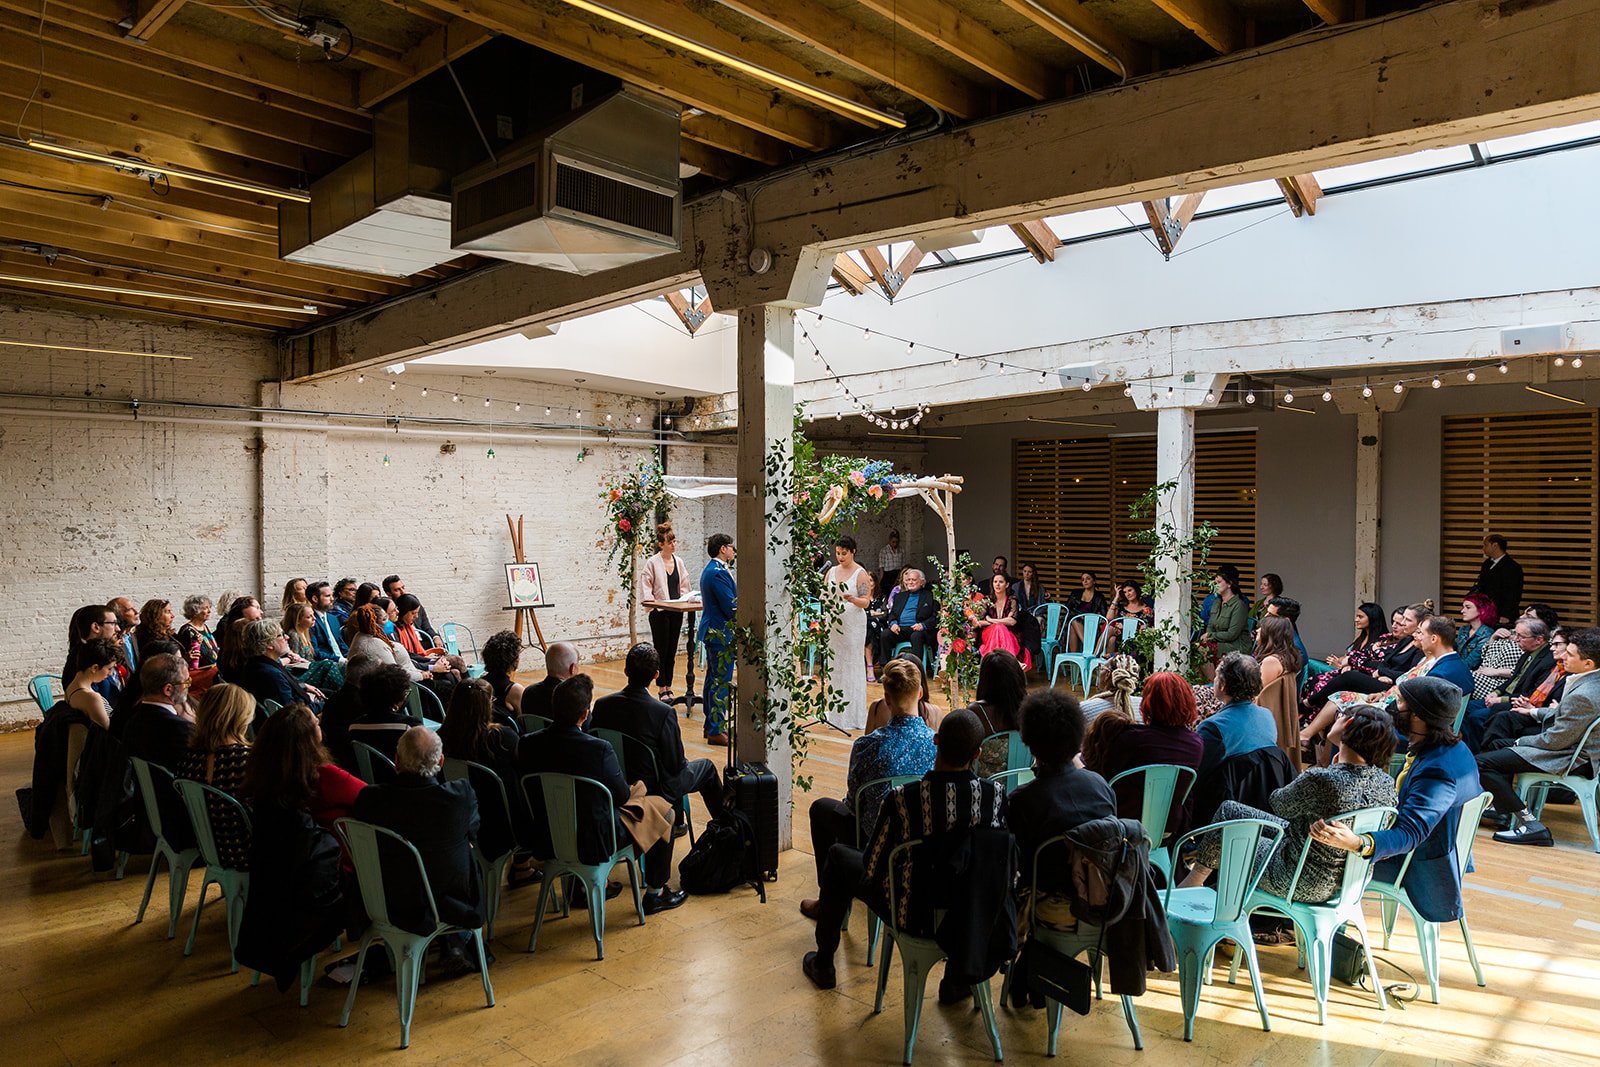  Candid, documentary wide photo bride and groom under chupah surrounded by guests during their nontraditional Jewish and Venezuelan wedding ceremony in the round at The Joinery Chicago an Industrial loft wedding venue In Logan Square. 